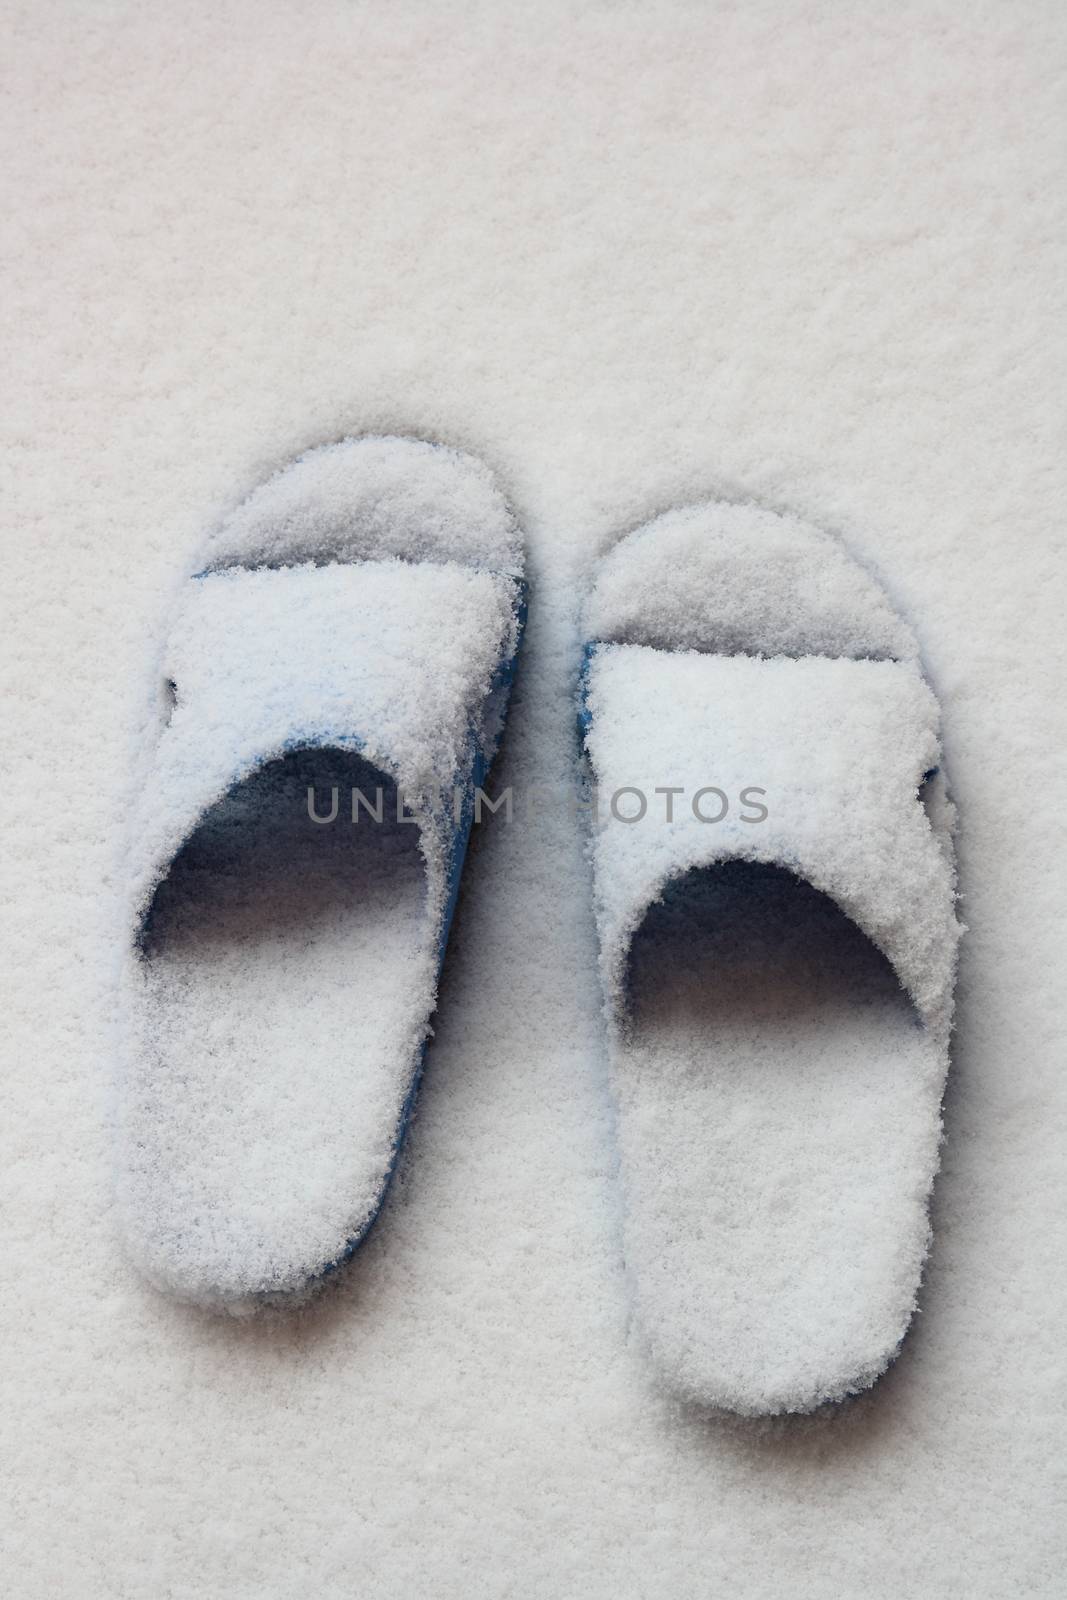 Slippers with snow at outside by mturhanlar